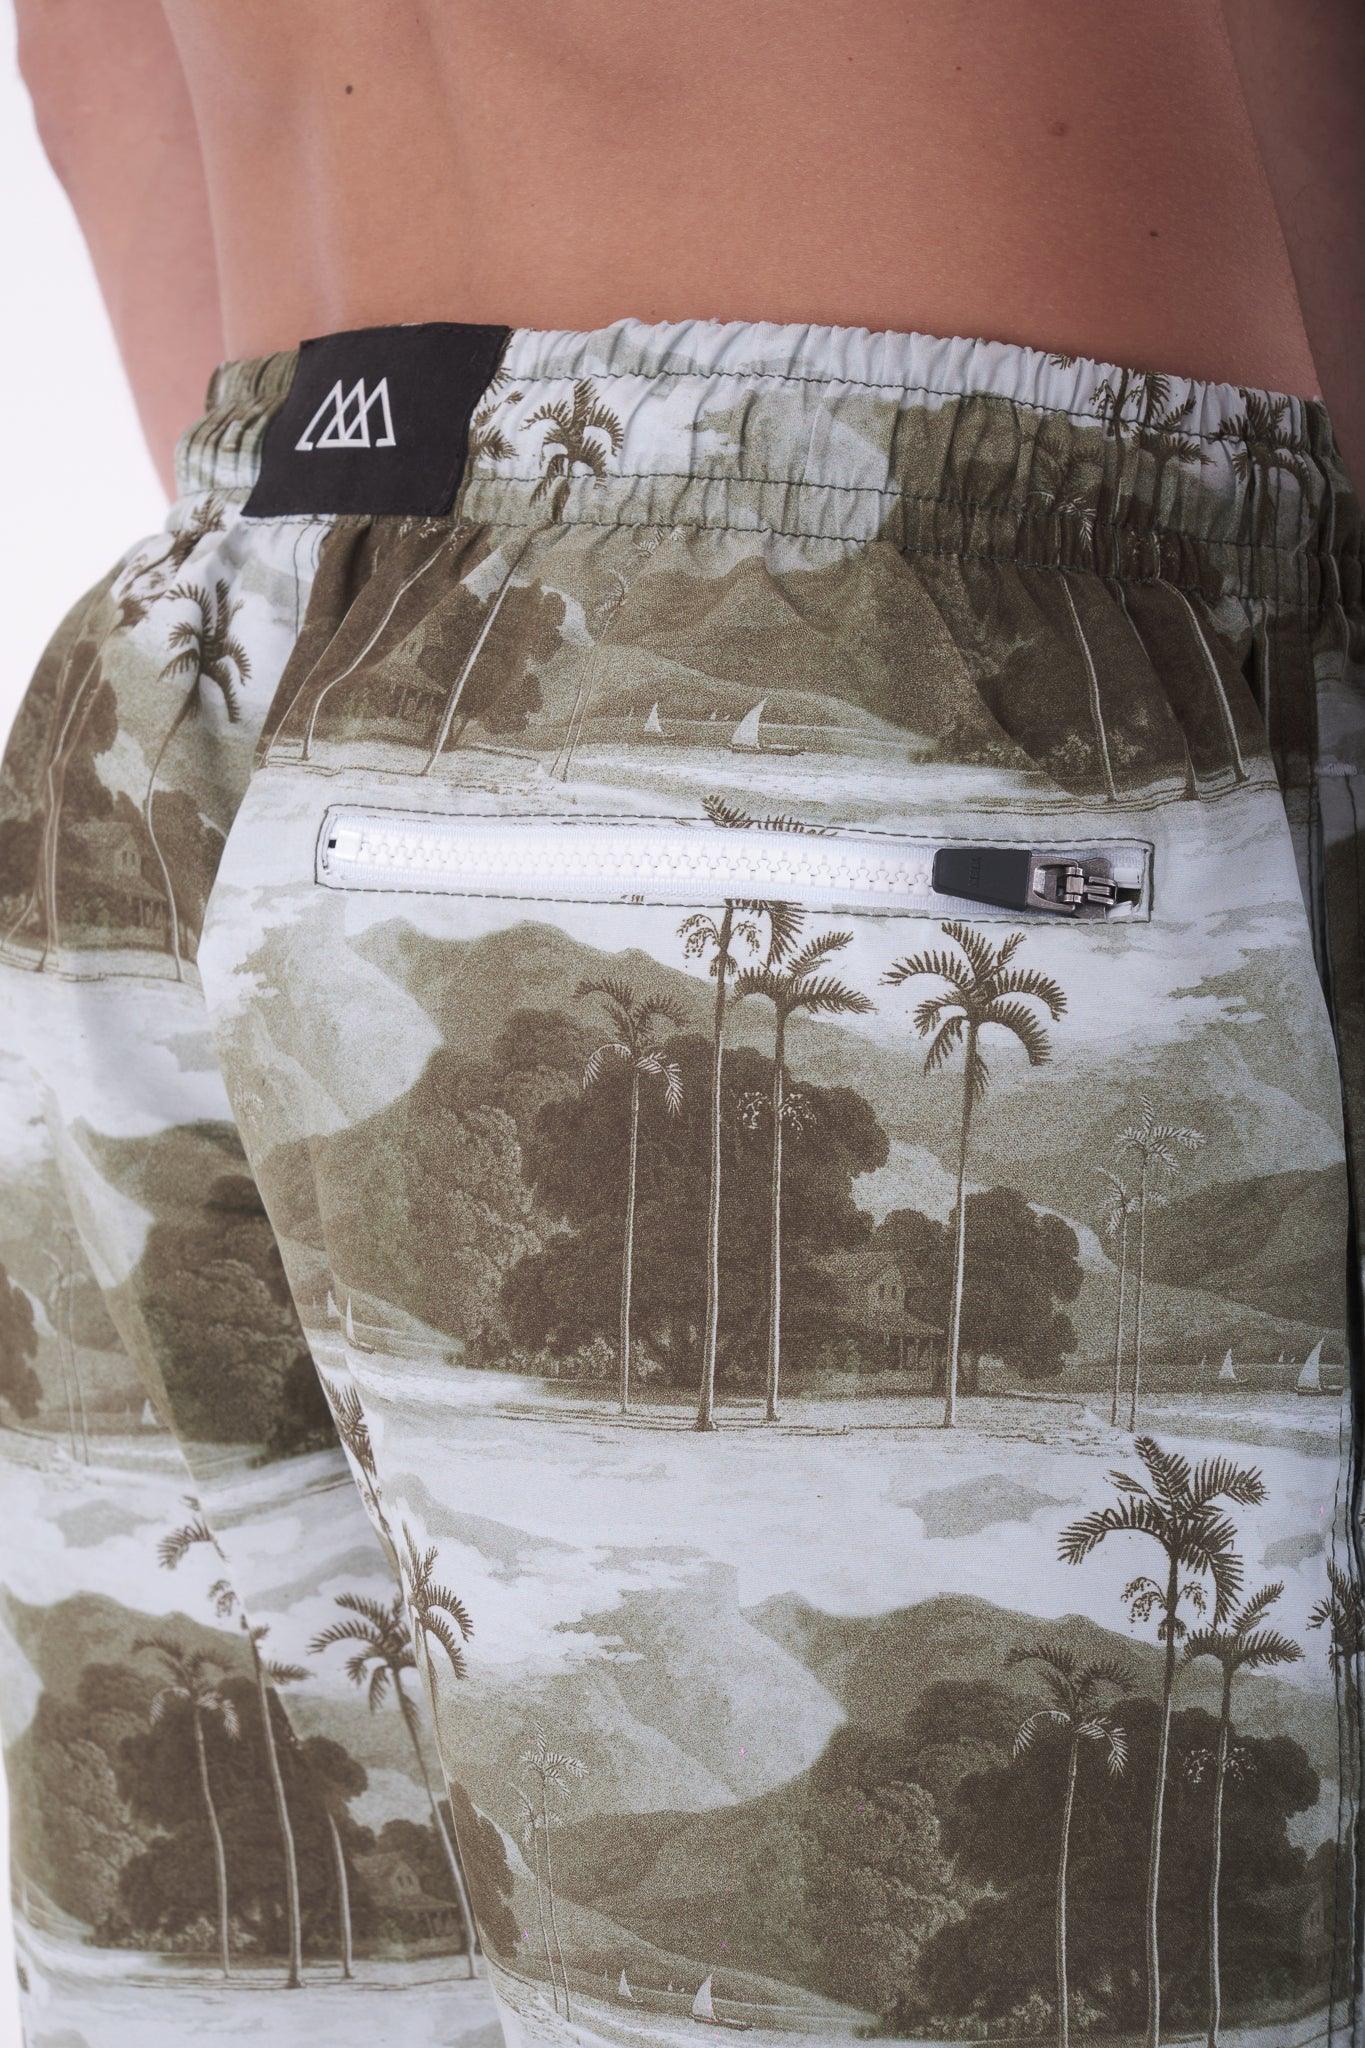 The Kastro Shorts - The Palms